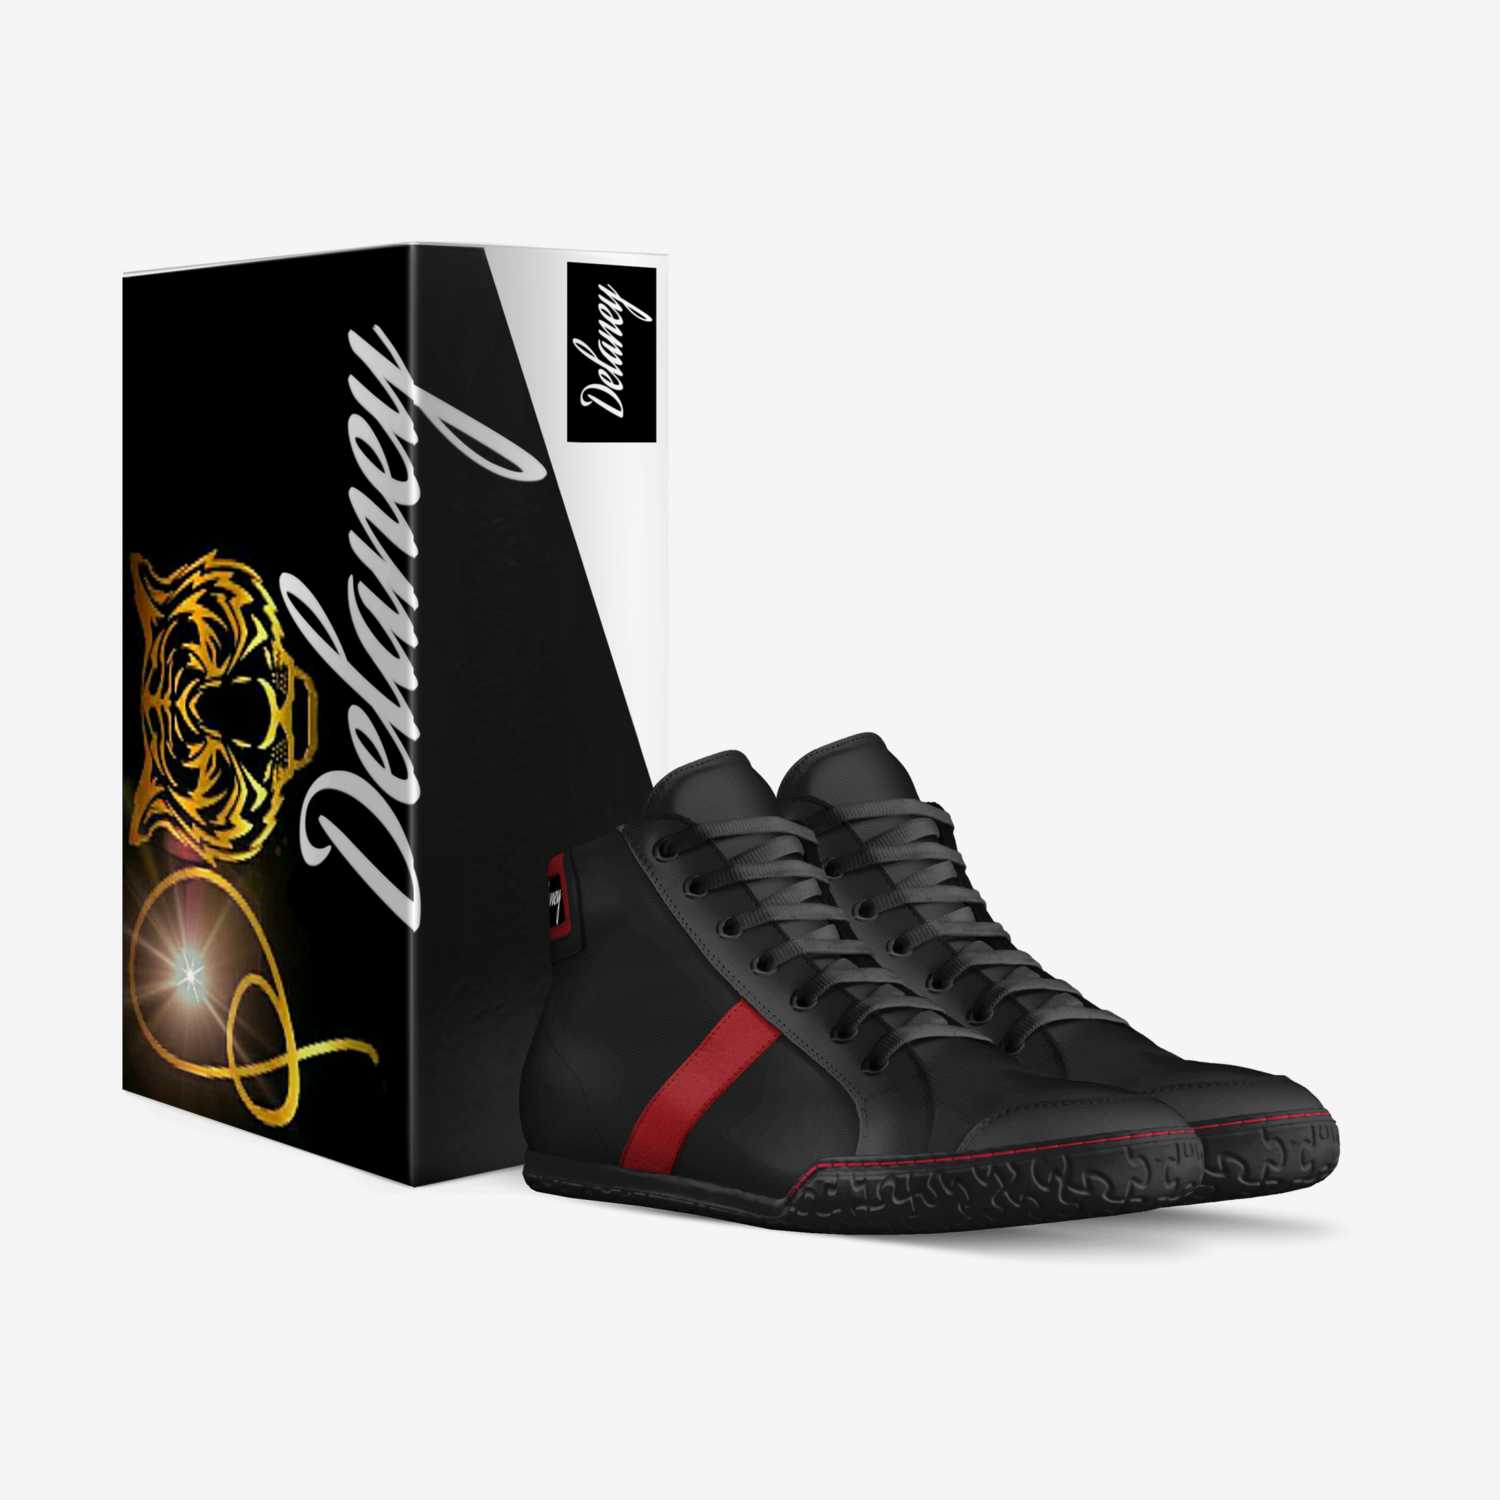 Delaney custom made in Italy shoes by Quest Delaney | Box view